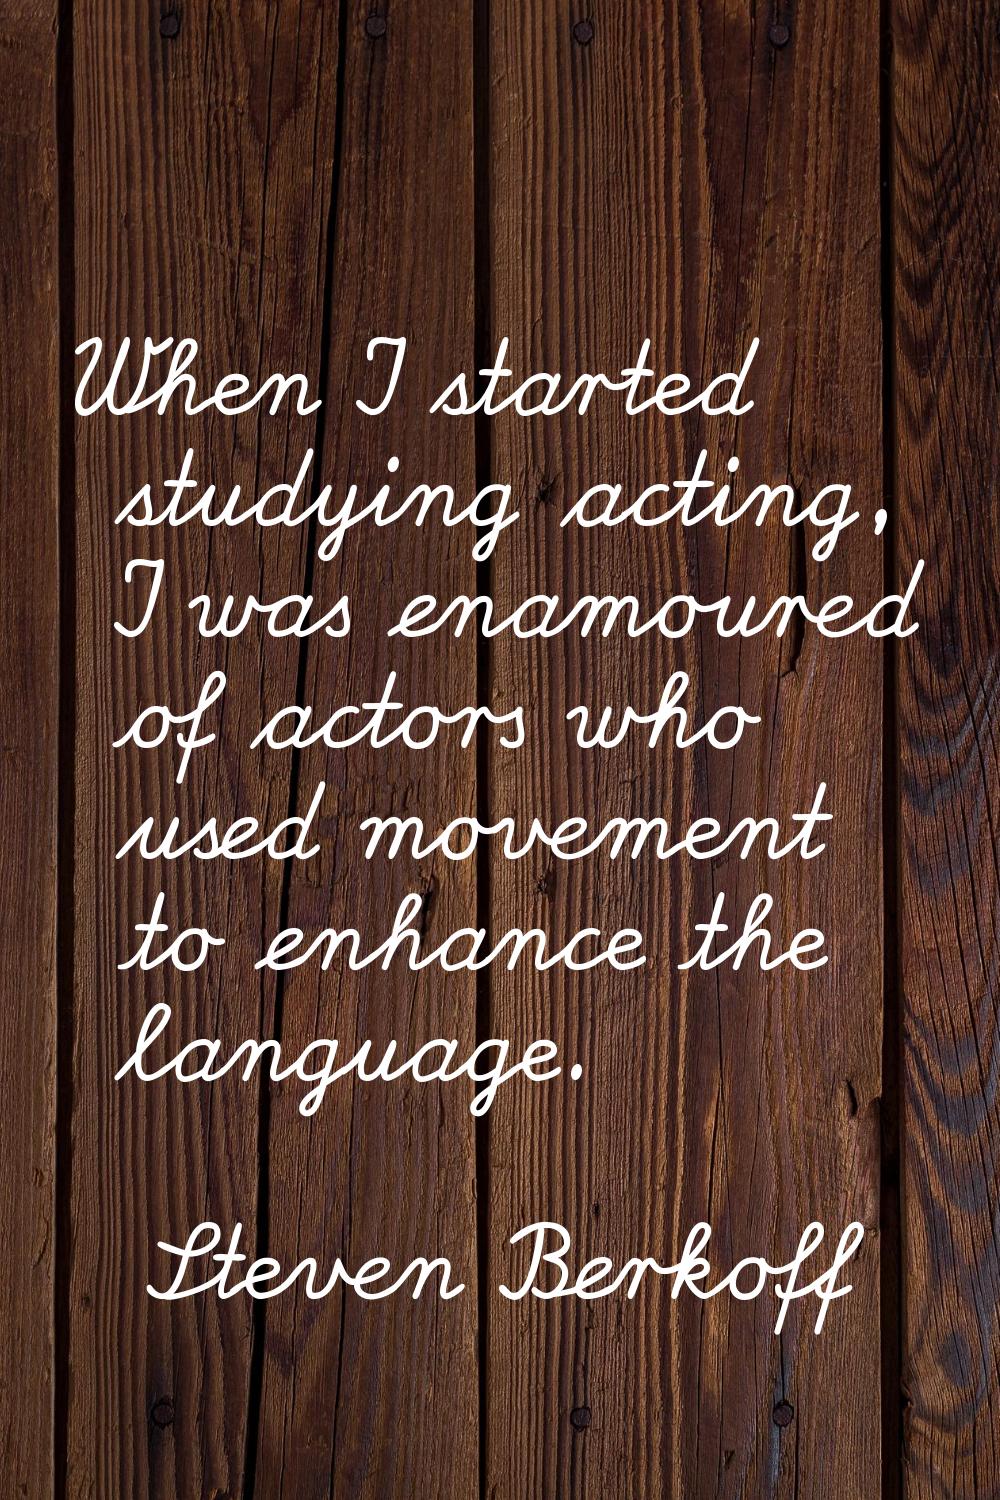 When I started studying acting, I was enamoured of actors who used movement to enhance the language